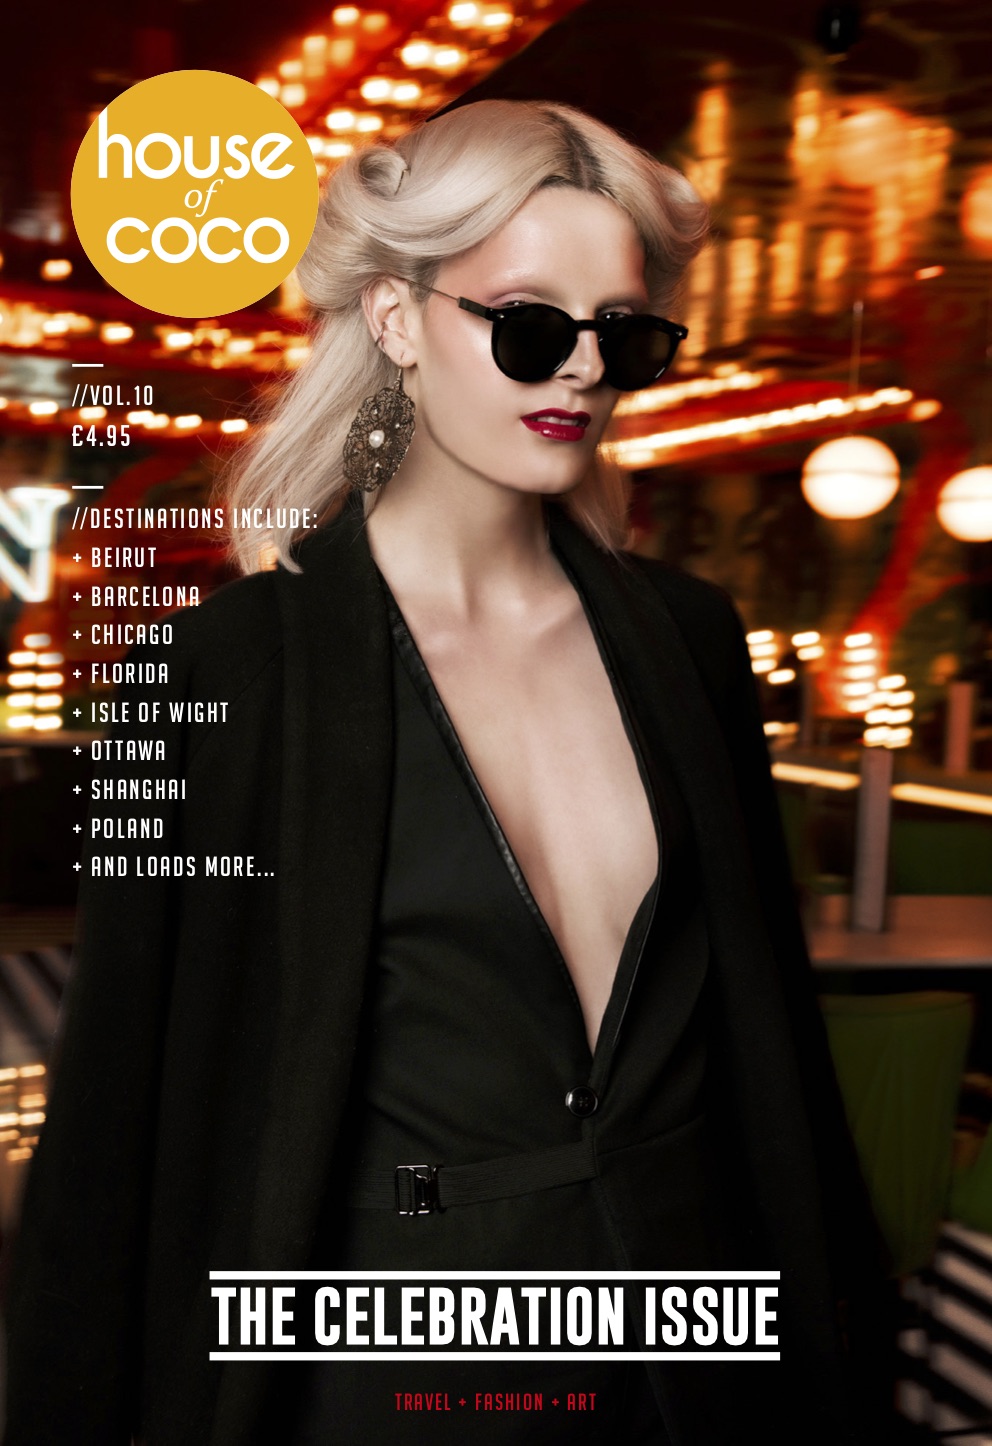 House of Coco Vol 10 Cover.jpg